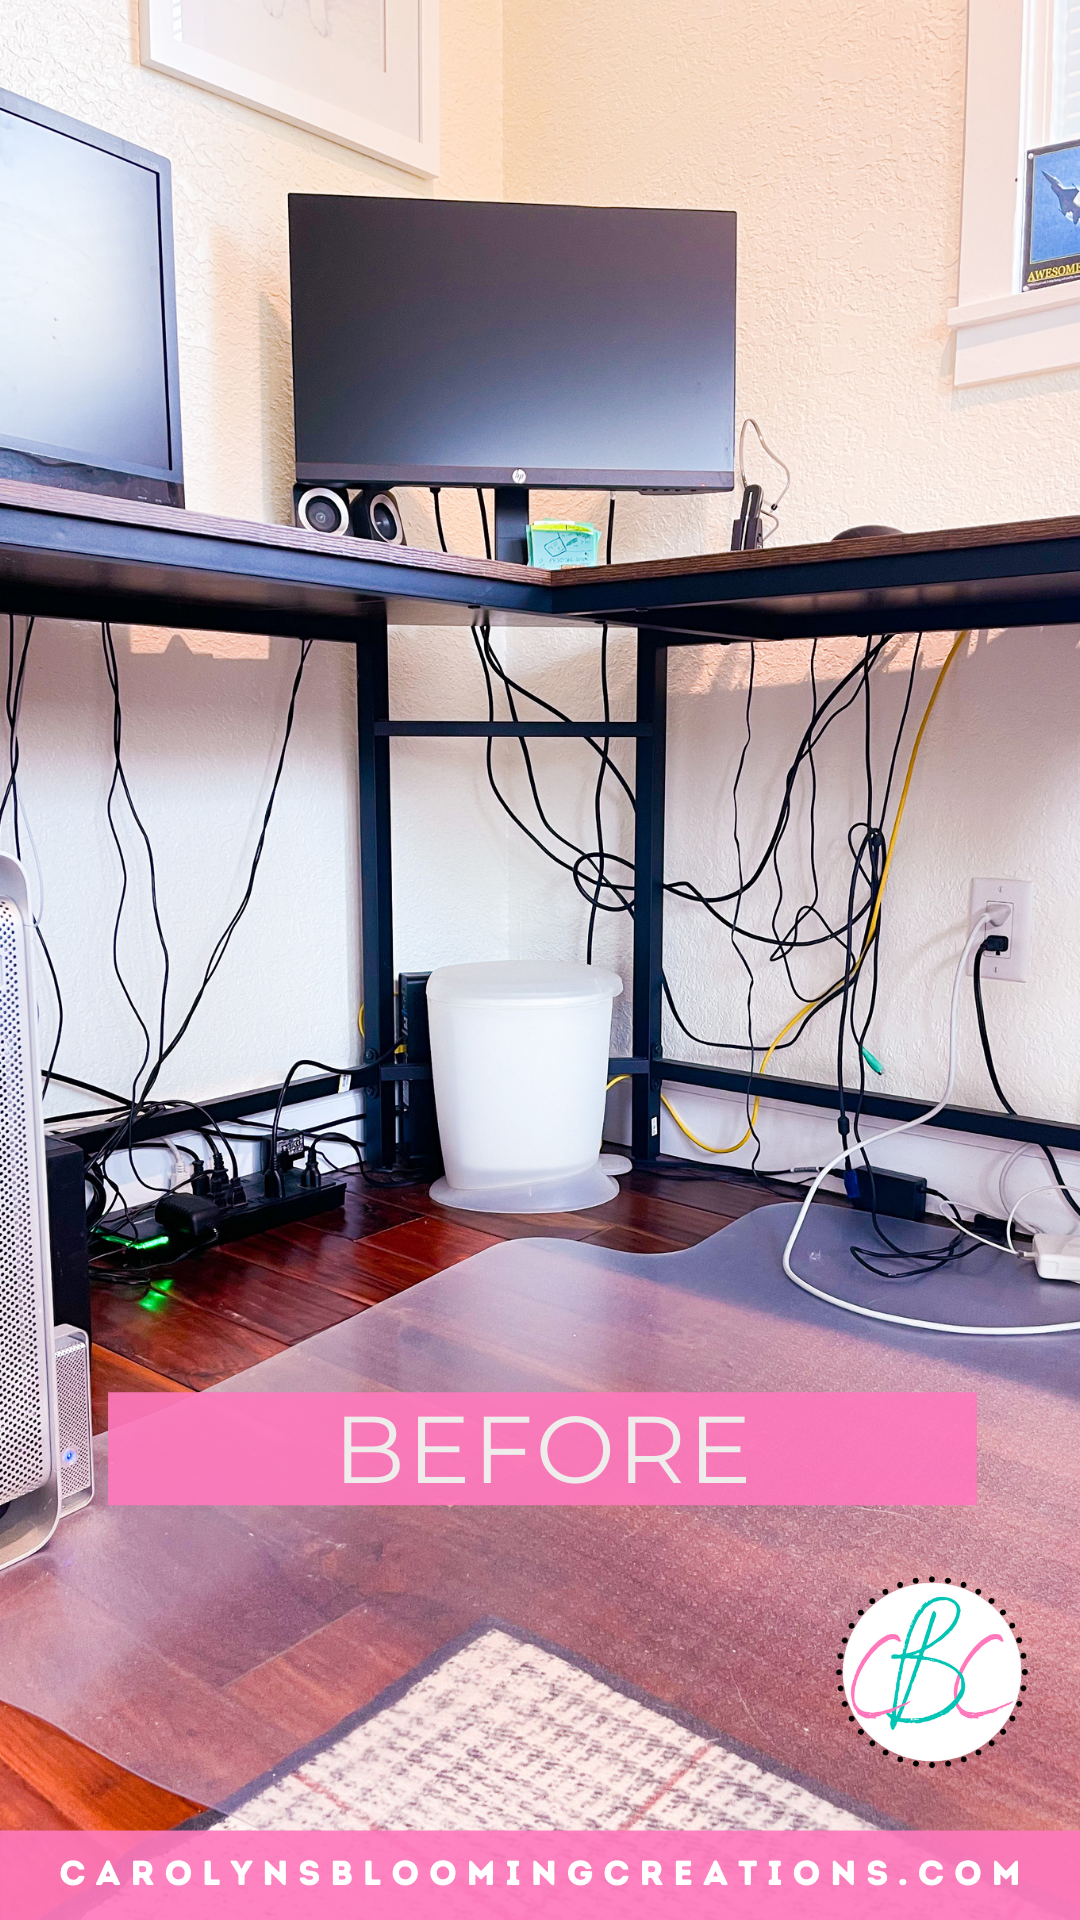 How To Hide Desk Cords, By Tasty Home